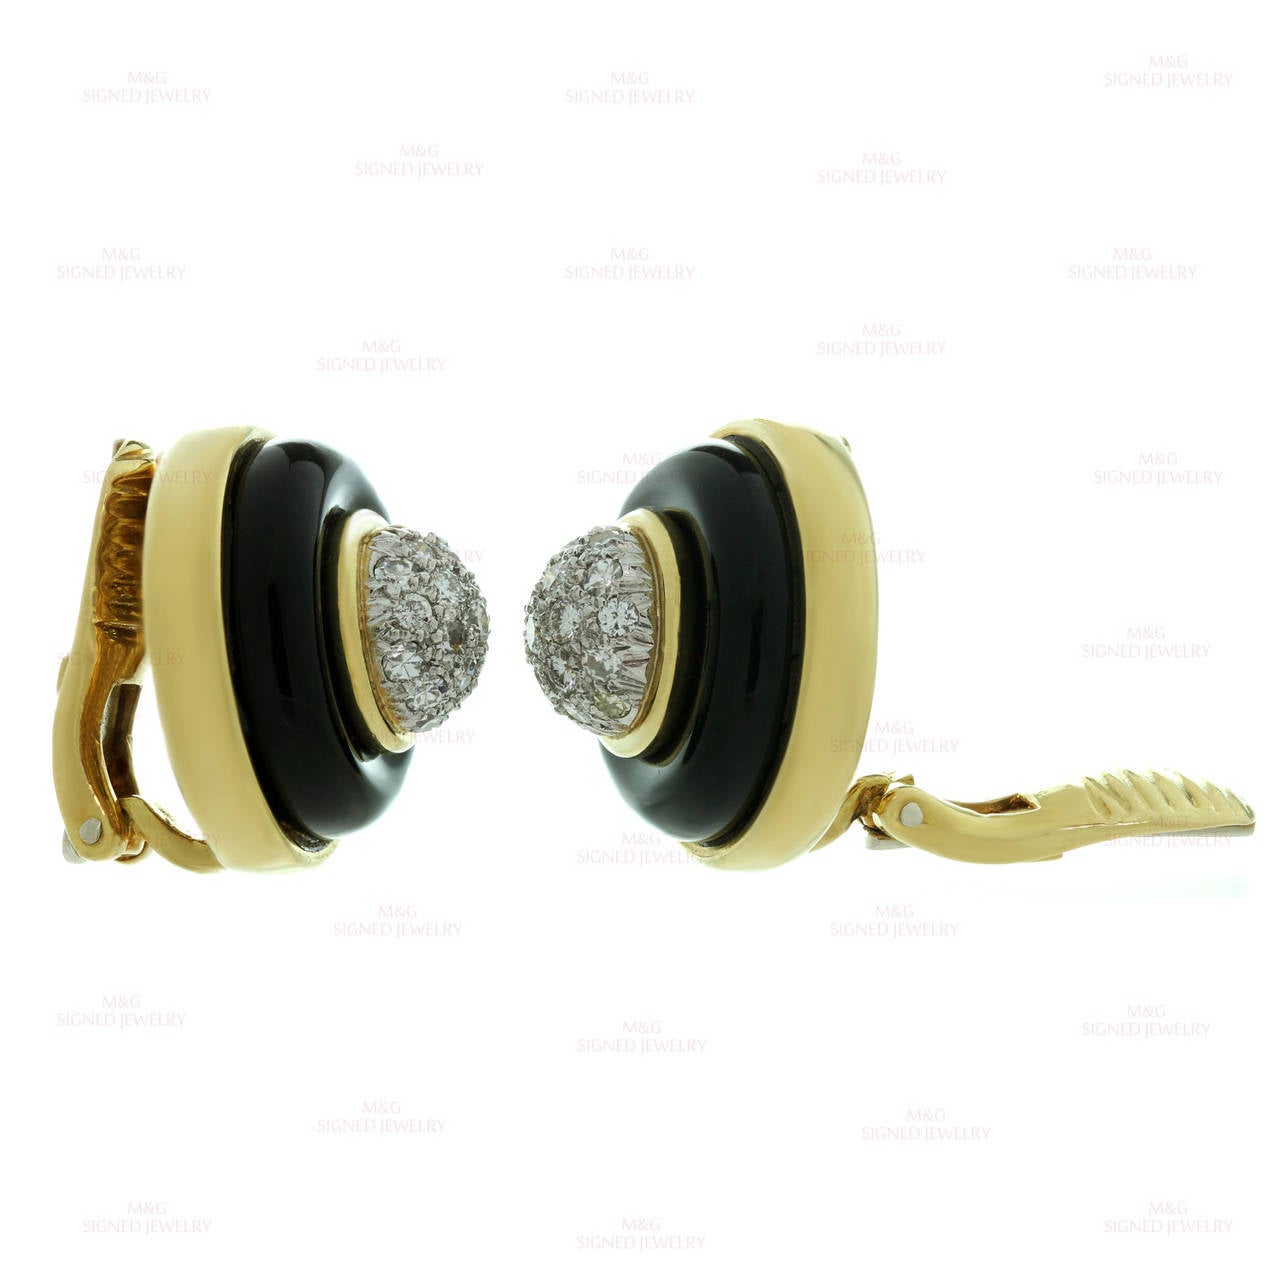 These fabulous vintage Tiffany & Co. clip-on earrings are crafted in 18k yellow gold with white gold accents and feature a dome-shaped round design inlaid with black onyx and accented with brilliant-cut round diamonds of an estimated 1.15 carats.